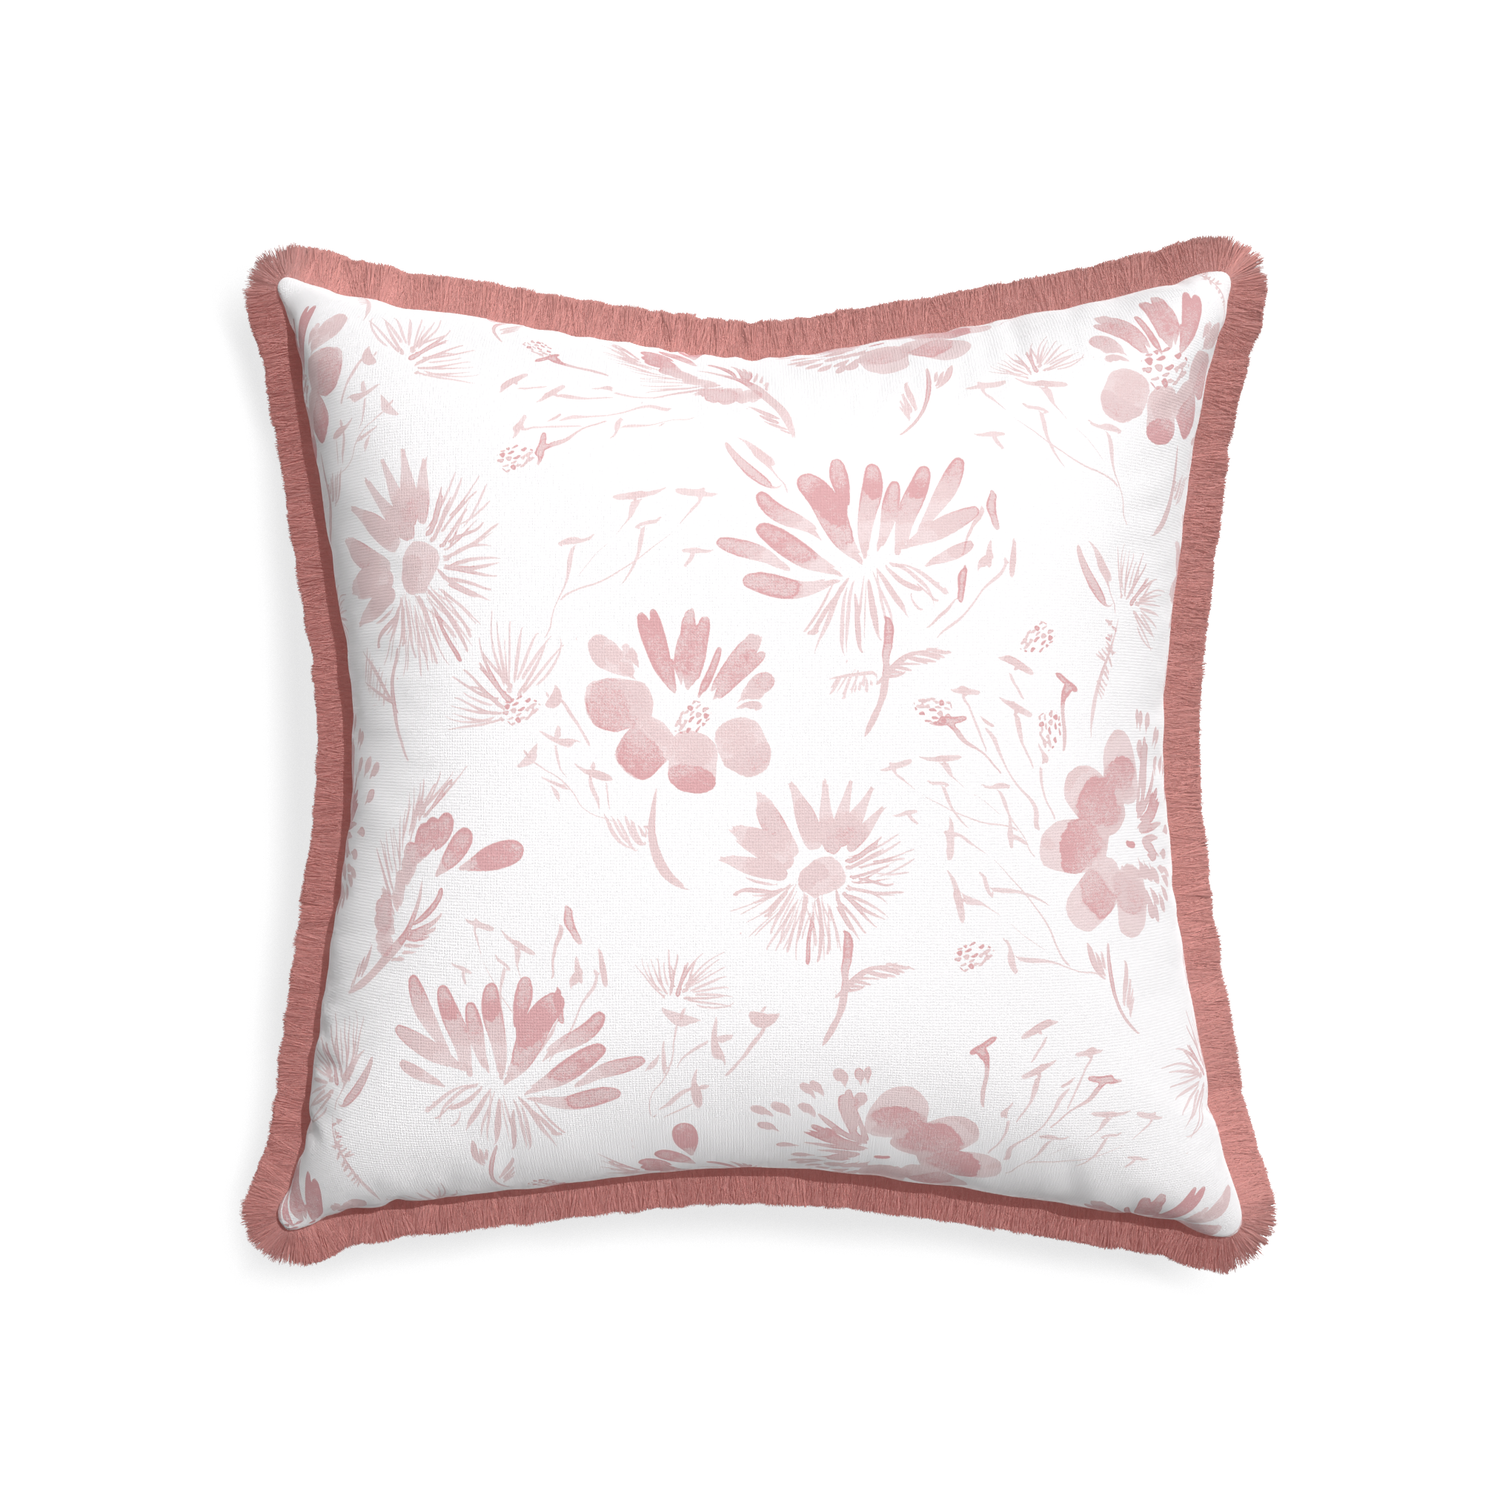 22-square blake custom pink floralpillow with d fringe on white background